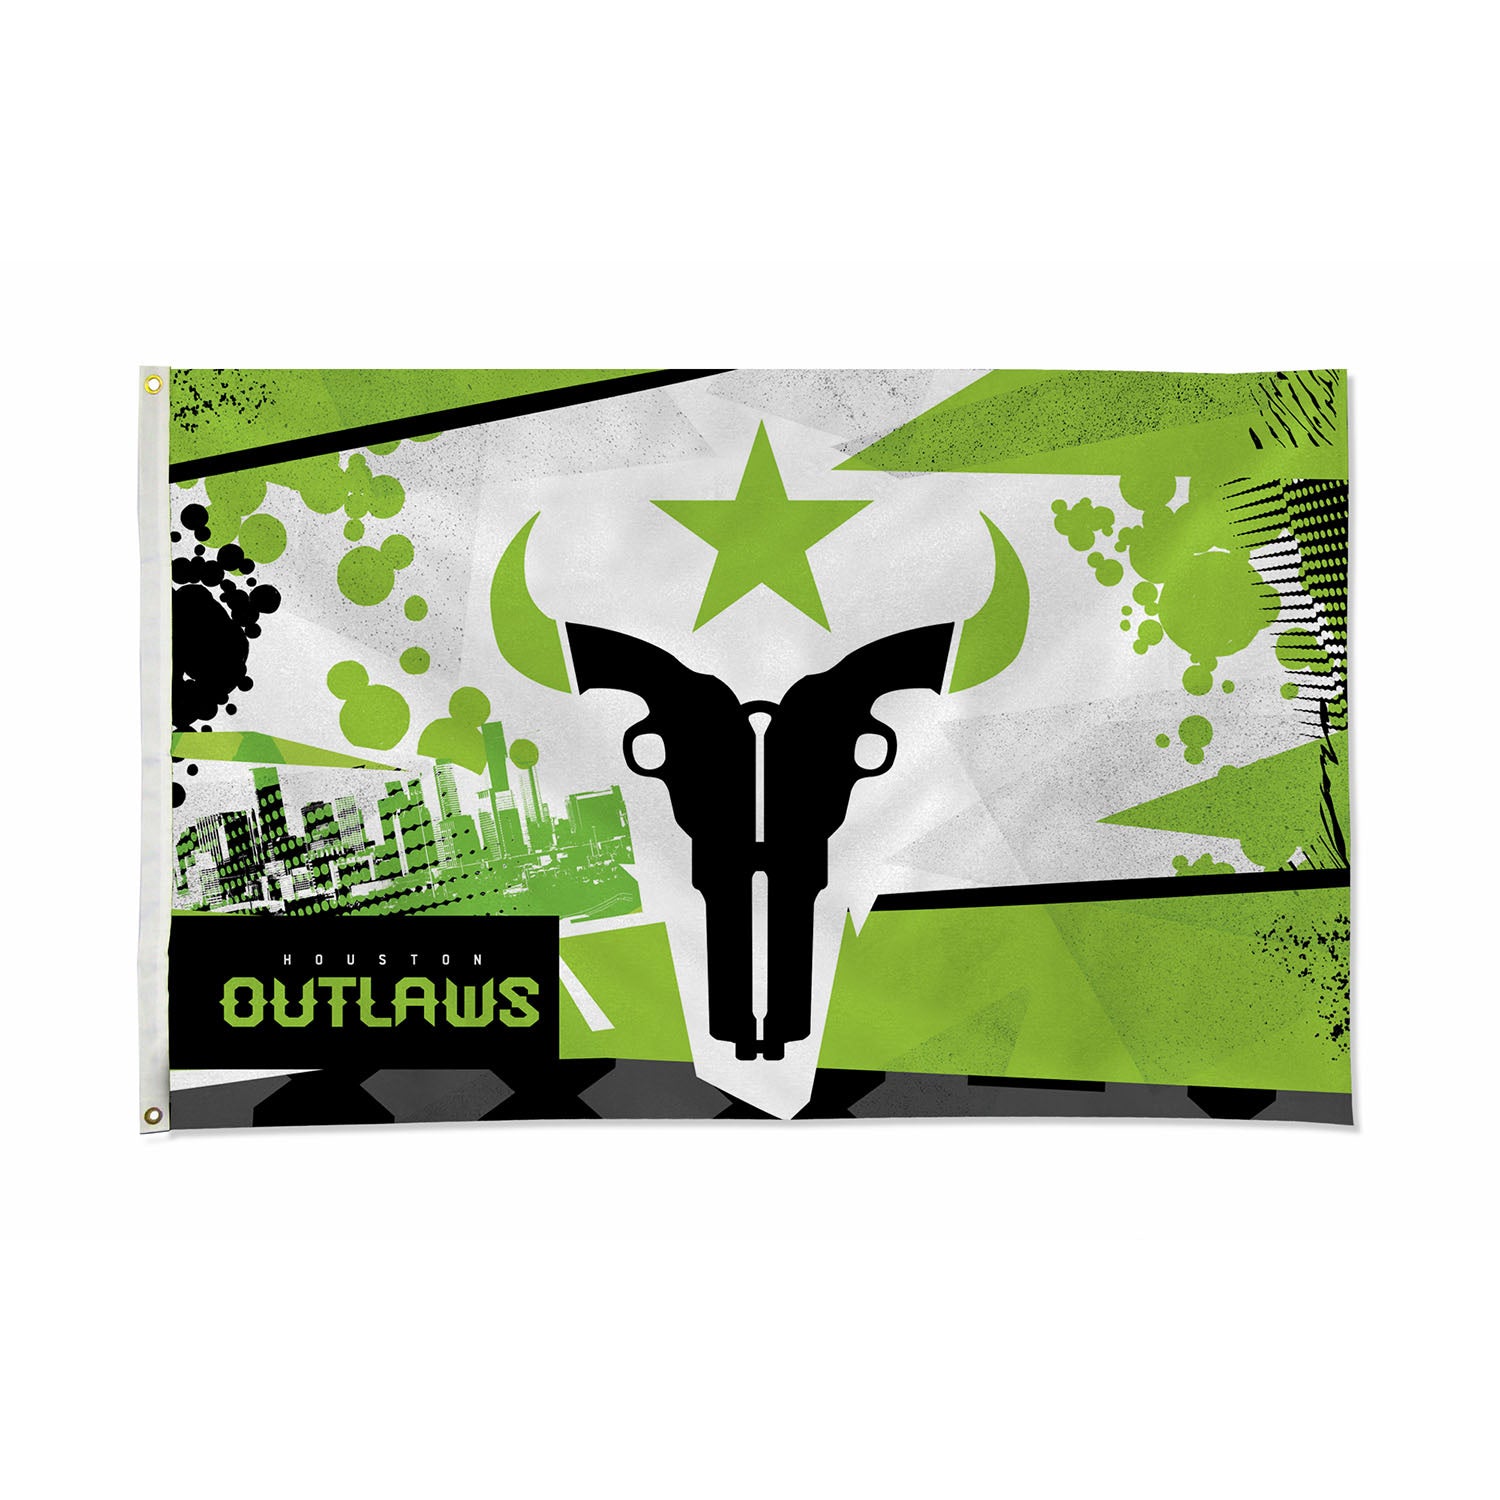 Houston Outlaws 3'x 5' Banner in Green - Front View